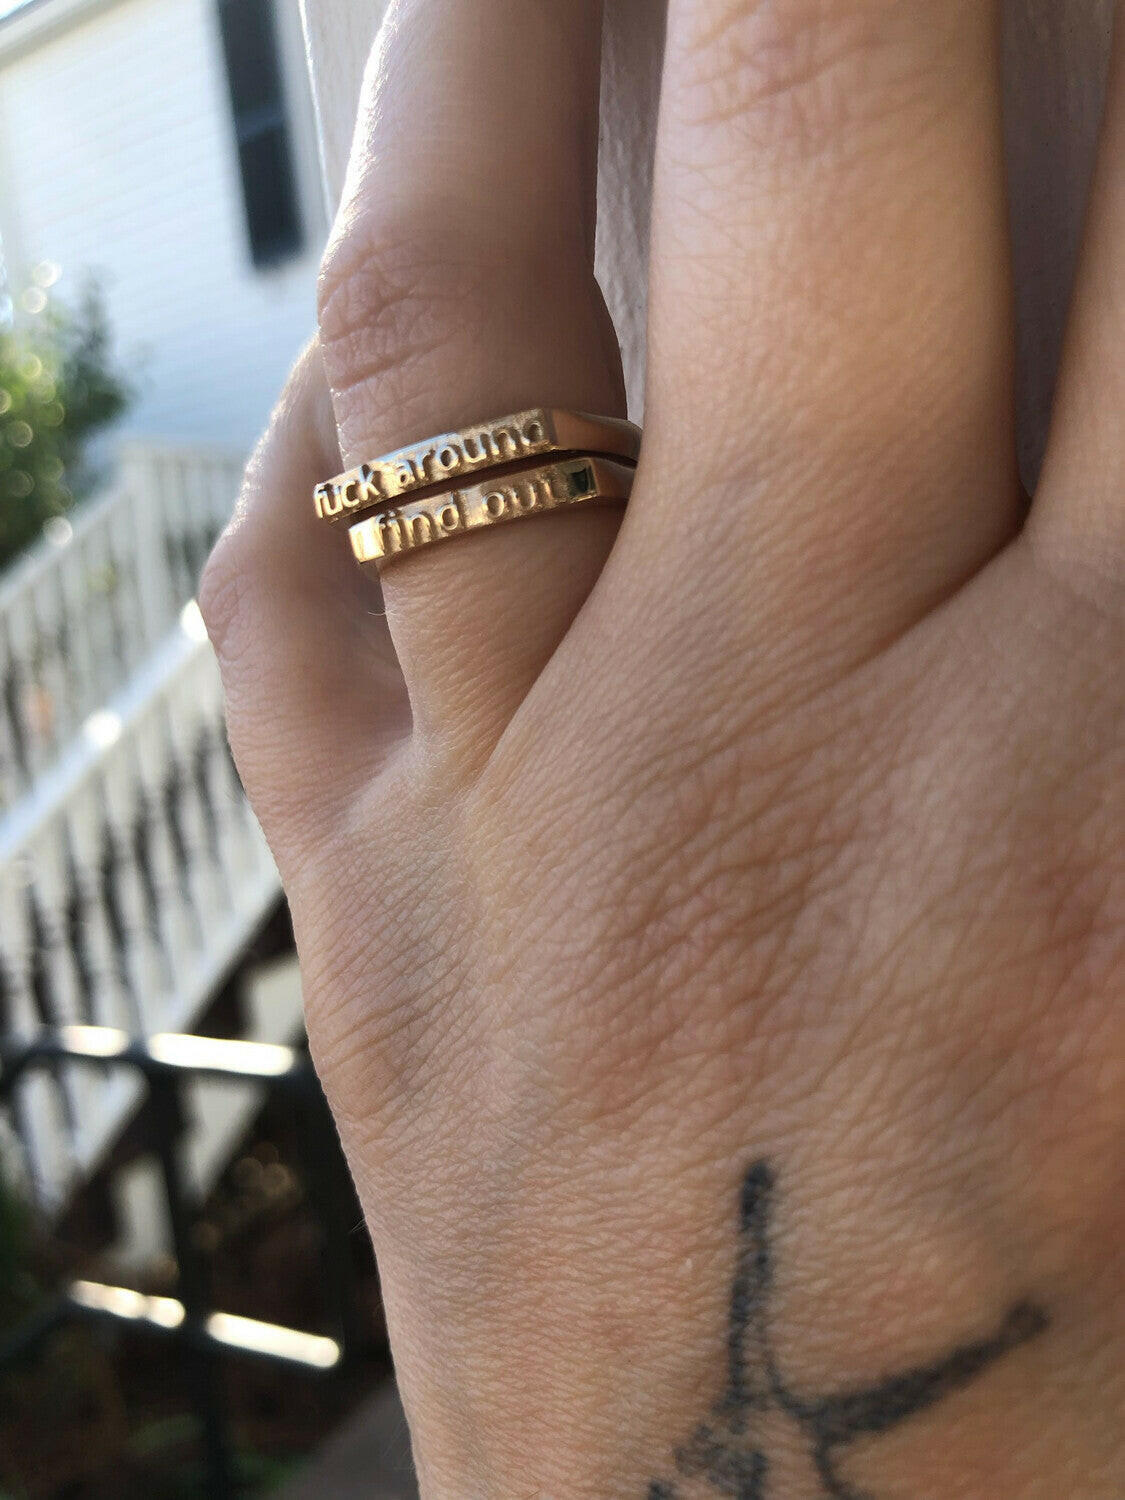 back of hand placed on a wall, two 5 karat yellow gold rings on the ring finger. first (top) ring has texts that reads "fuck around", second (bottom) ring has text that reads "find out"